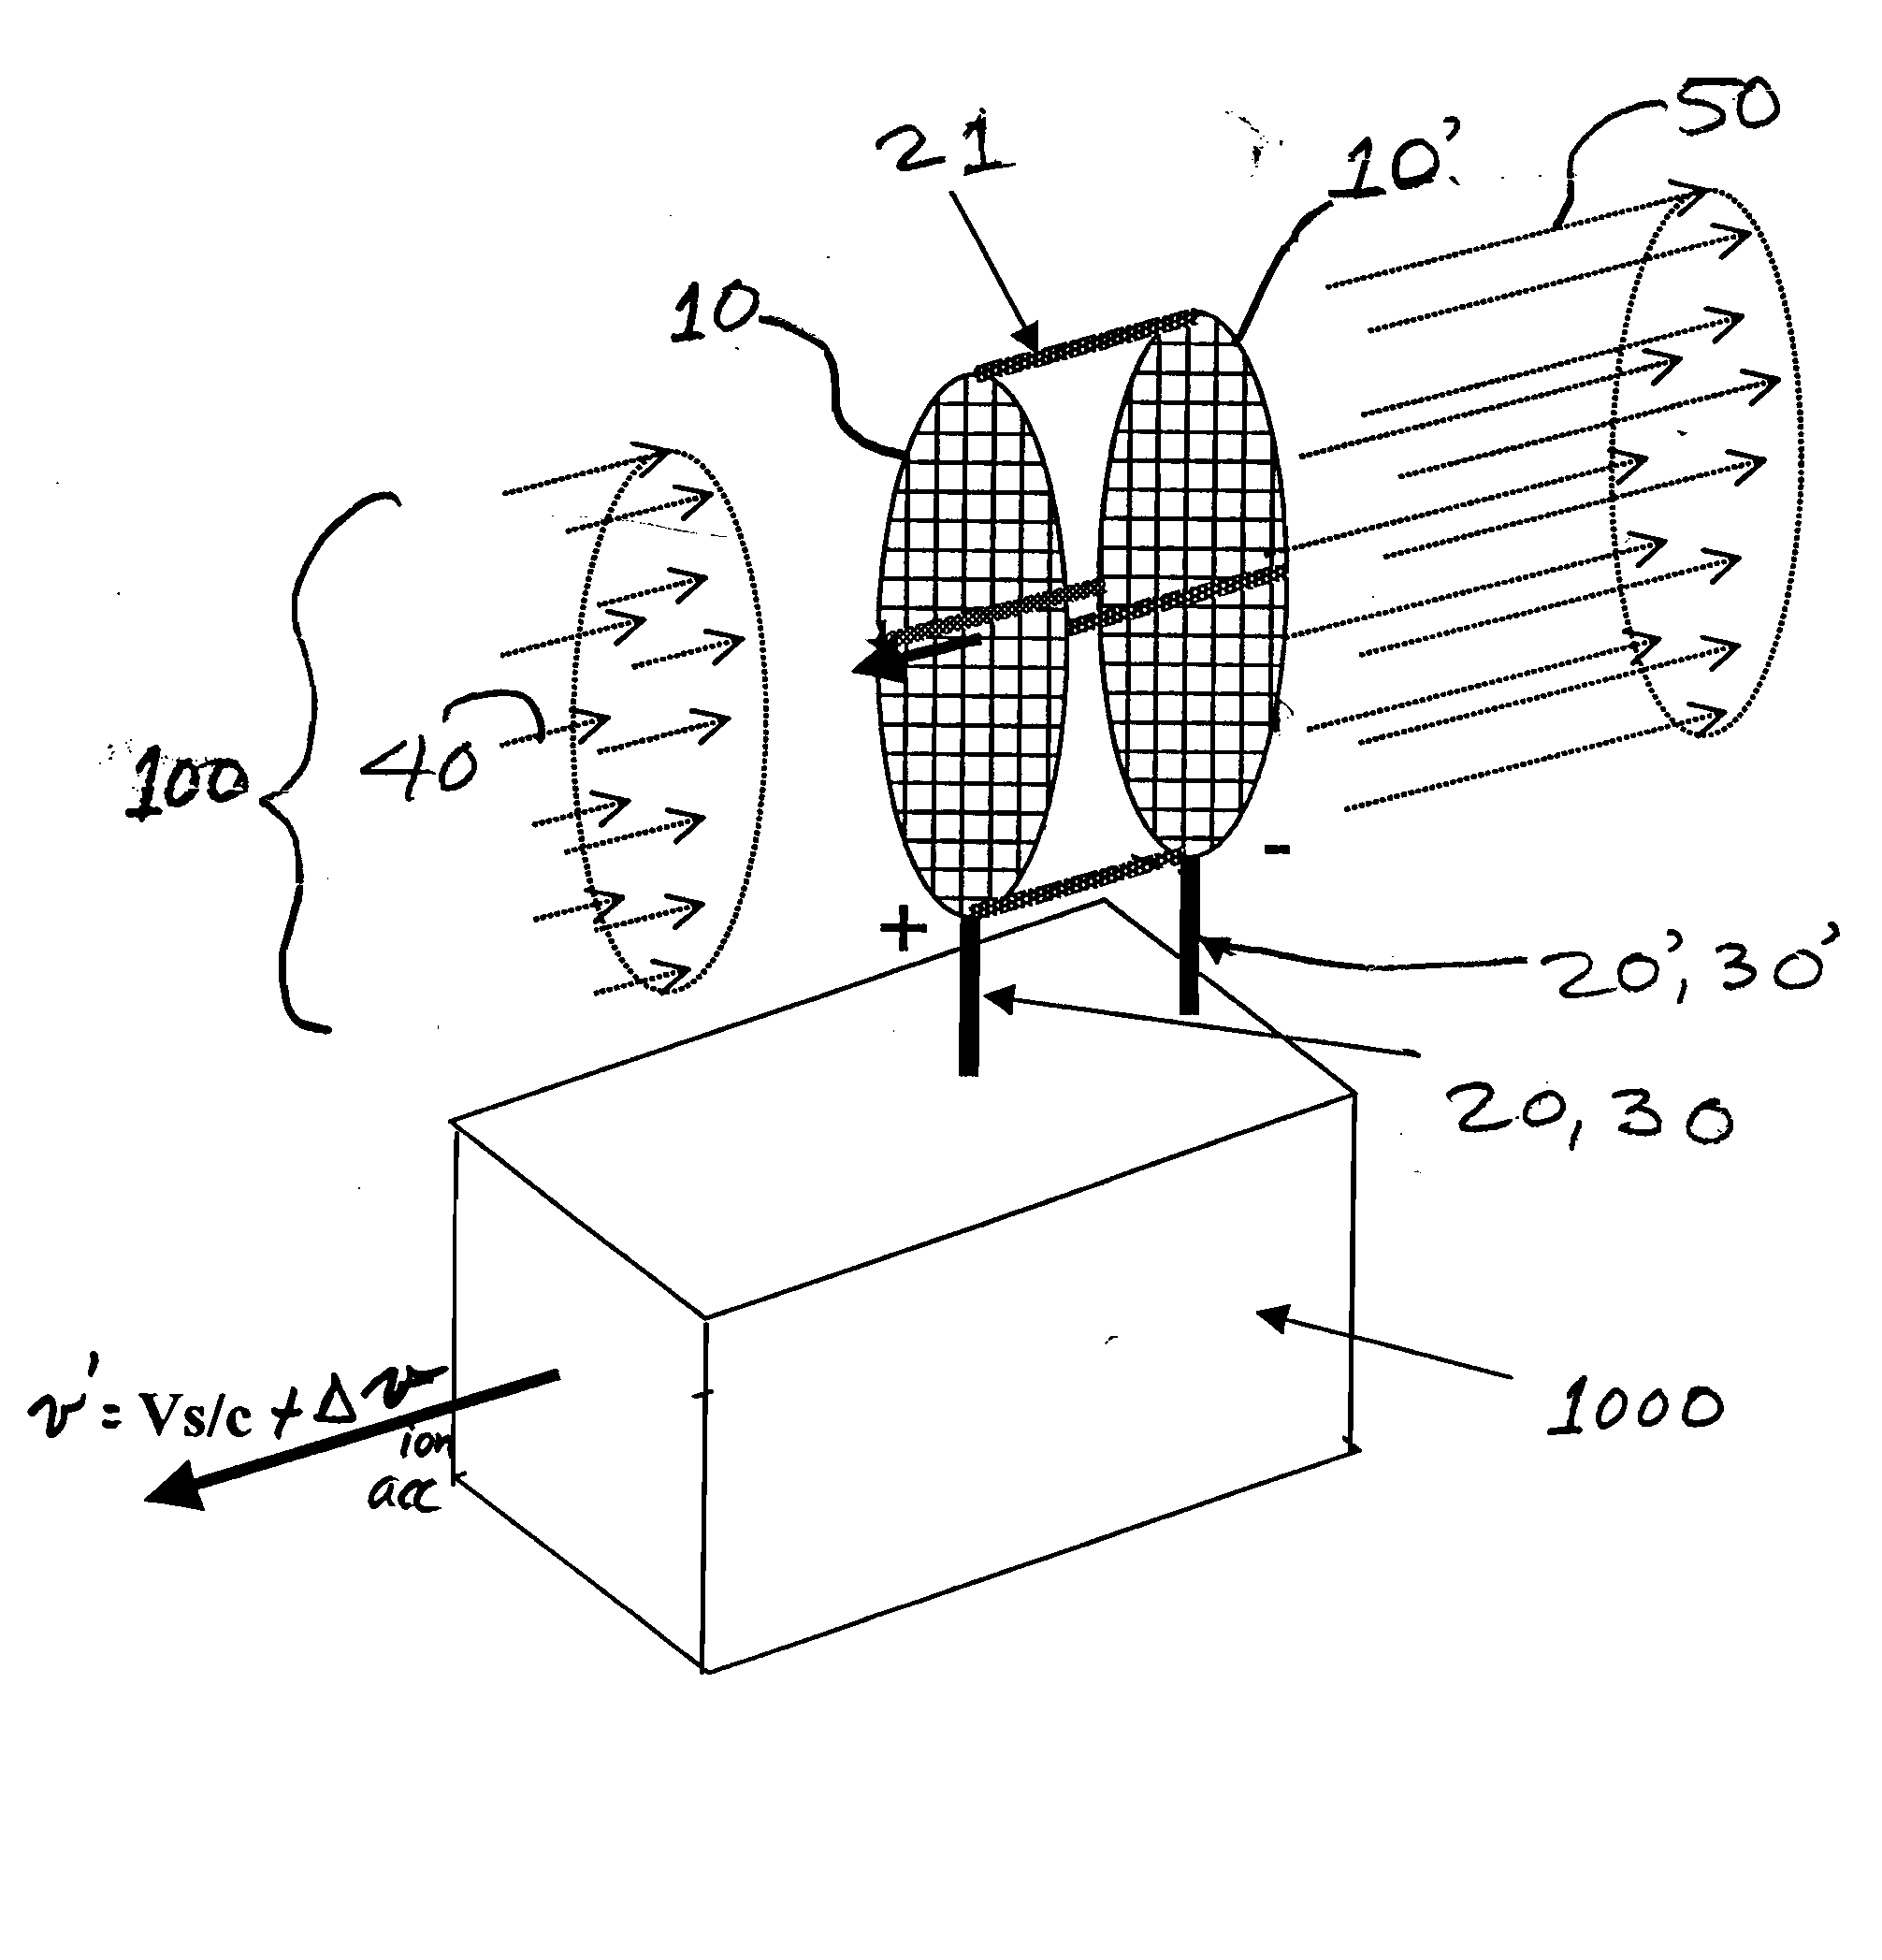 System and Method for an Ambient Atmosphere Ion Thruster